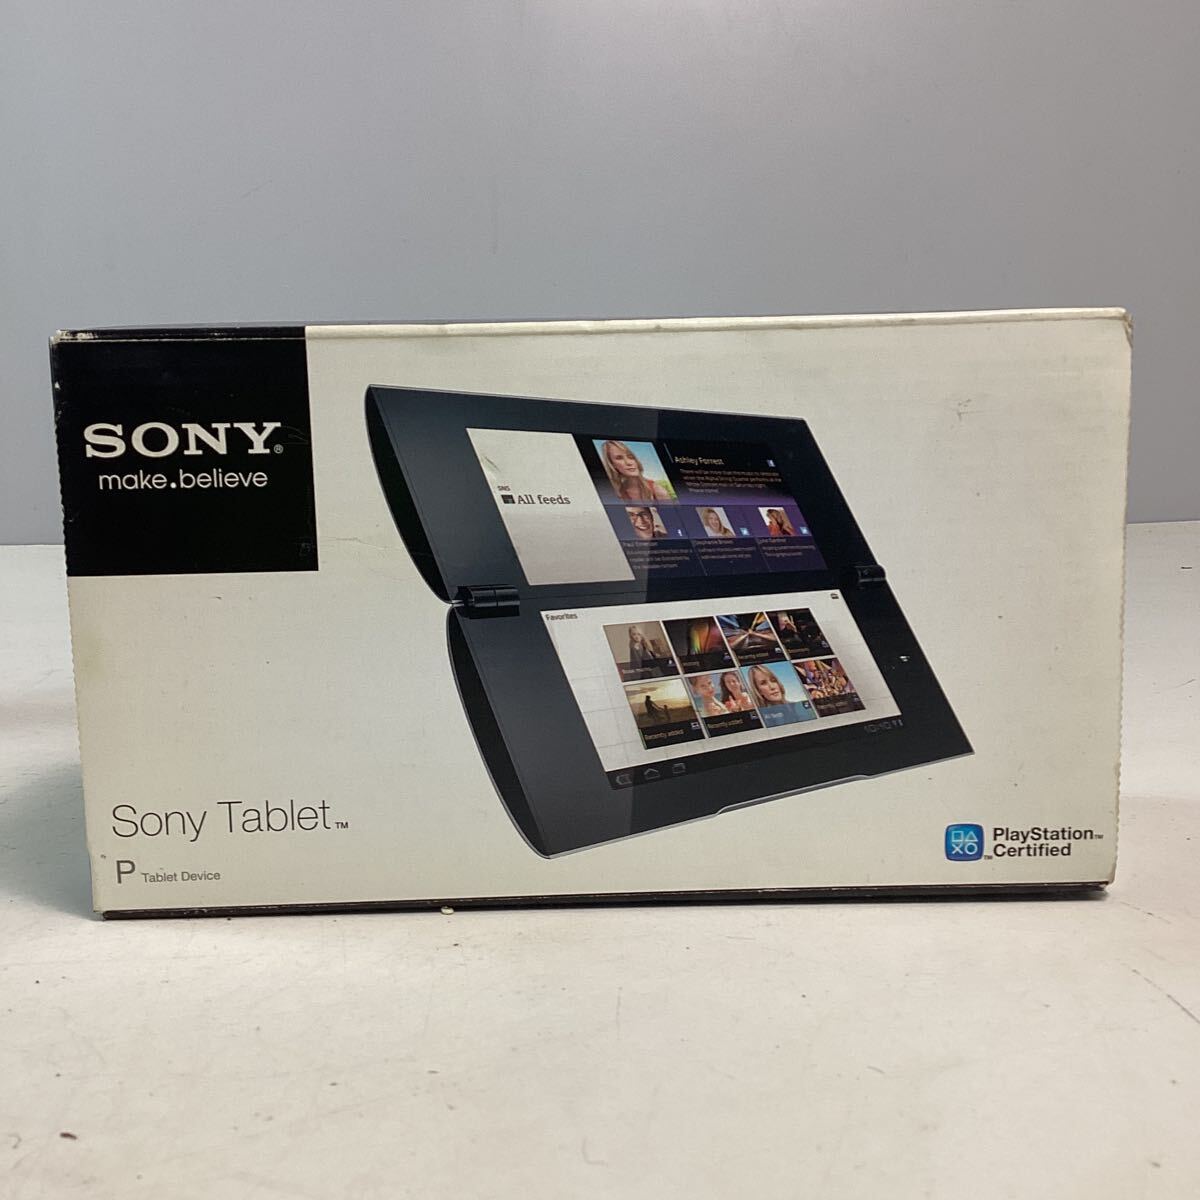 y3423 ソニー Sony Tablet Pセット シルバー SGPT211JP/S 折りたたみ 2つ折り Android タブレット 箱付き 通電確認済 中古_画像1